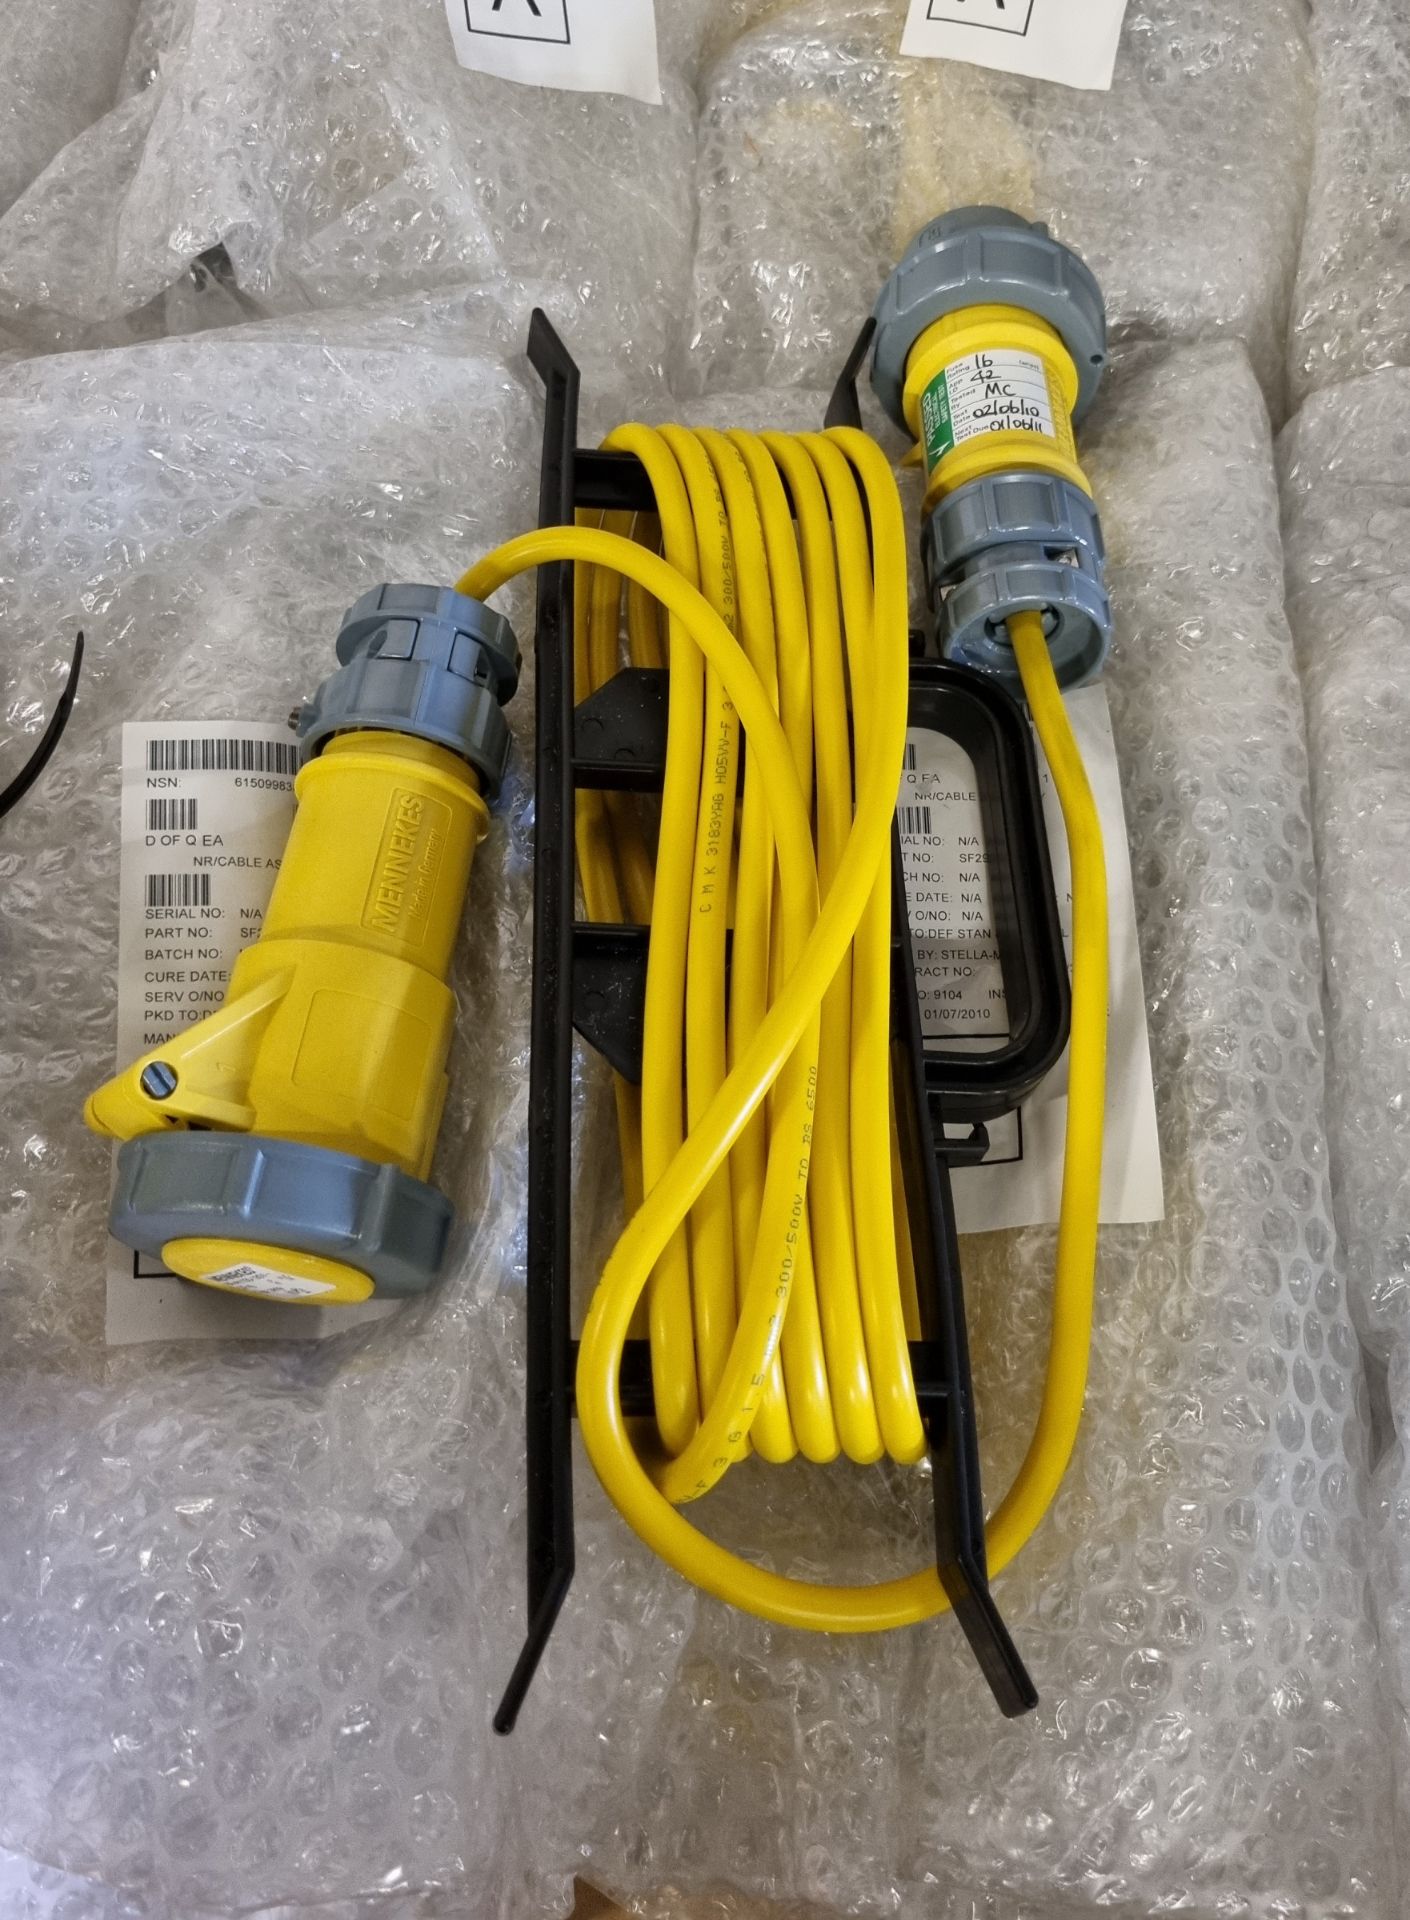 15x 110V extension leads with Mennekes Type 3794 & Type 3859 2P+E plugs - approx 5m length - Image 4 of 5